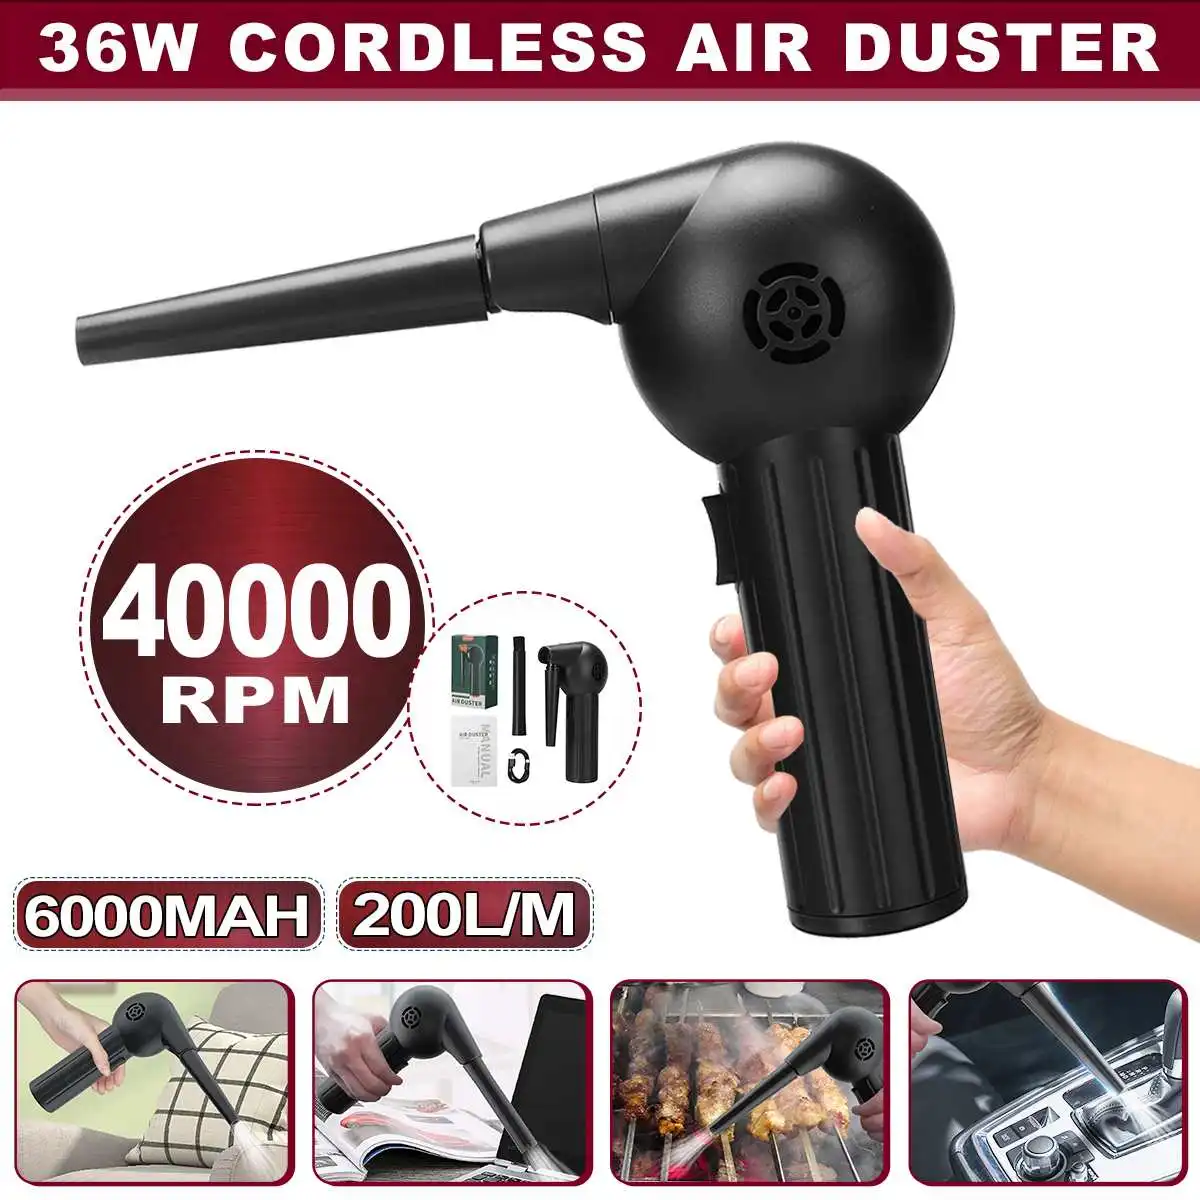 

NEW 6000mah Cordless Air Duster Compressed 40000 RPM Air Blower Cleaning Tool For Computer Laptop Keyboard Electronics Cleaning